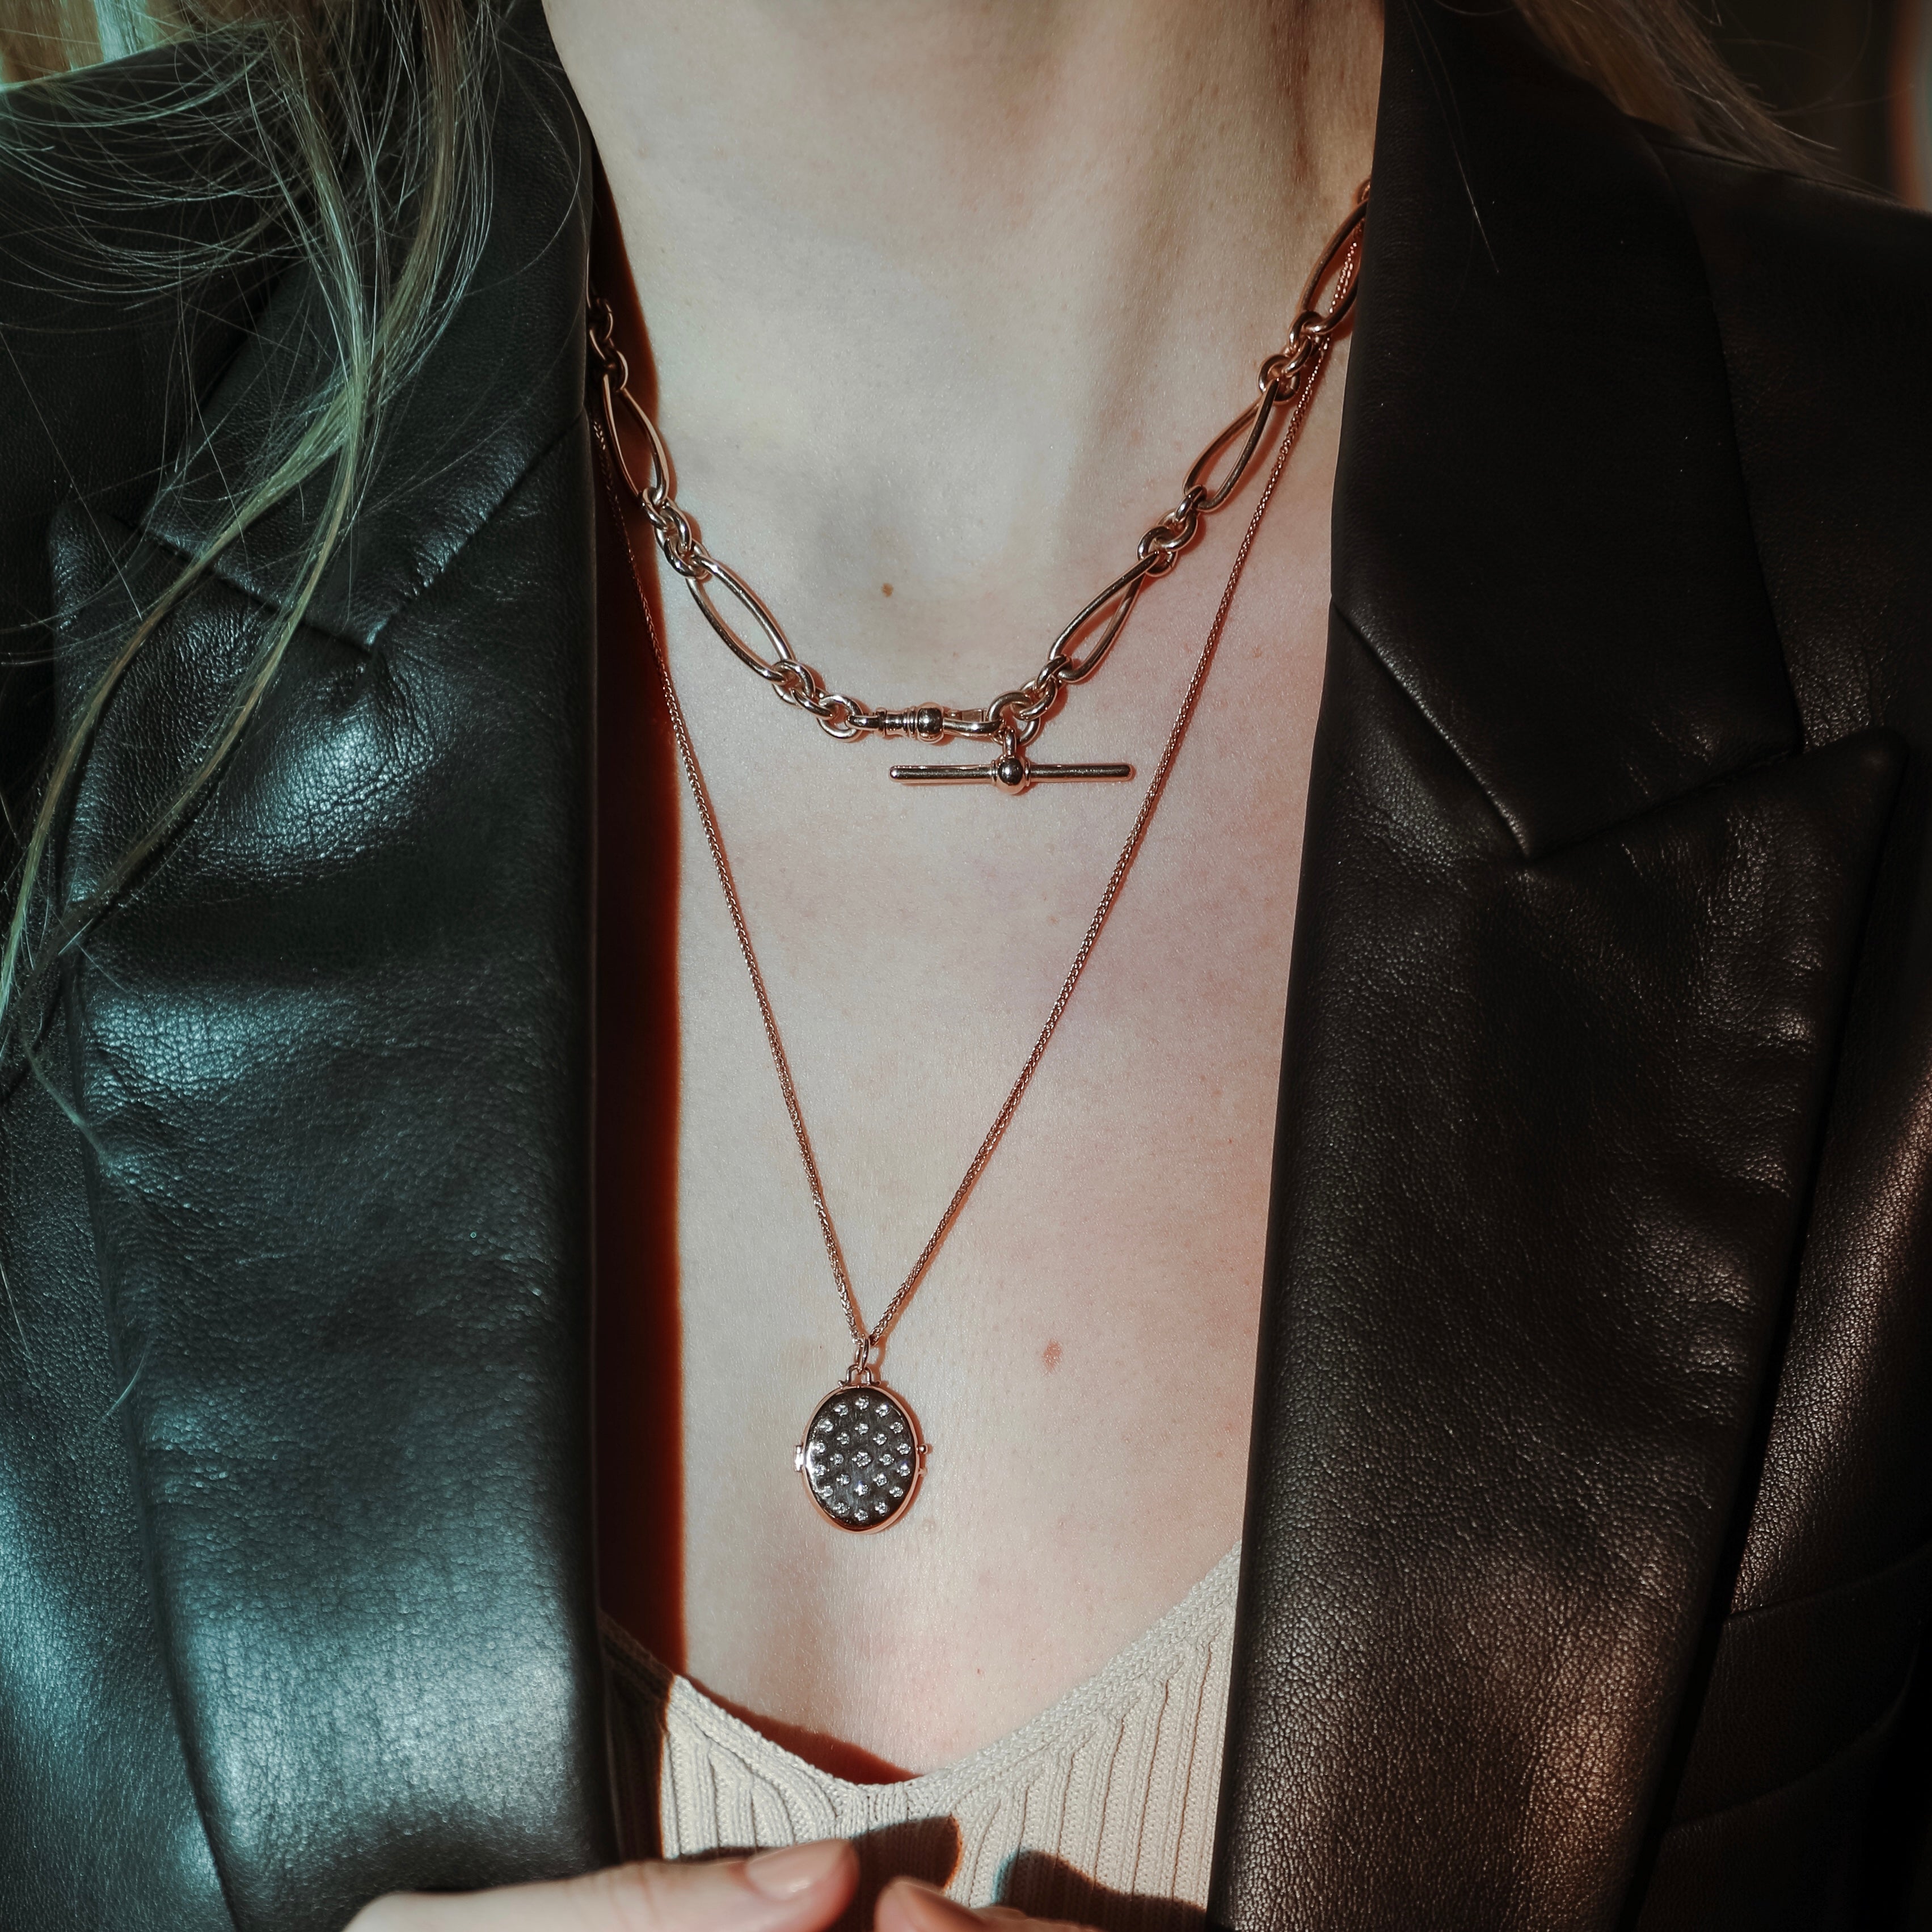 Etoile Locket shown with the Antique Link Necklace